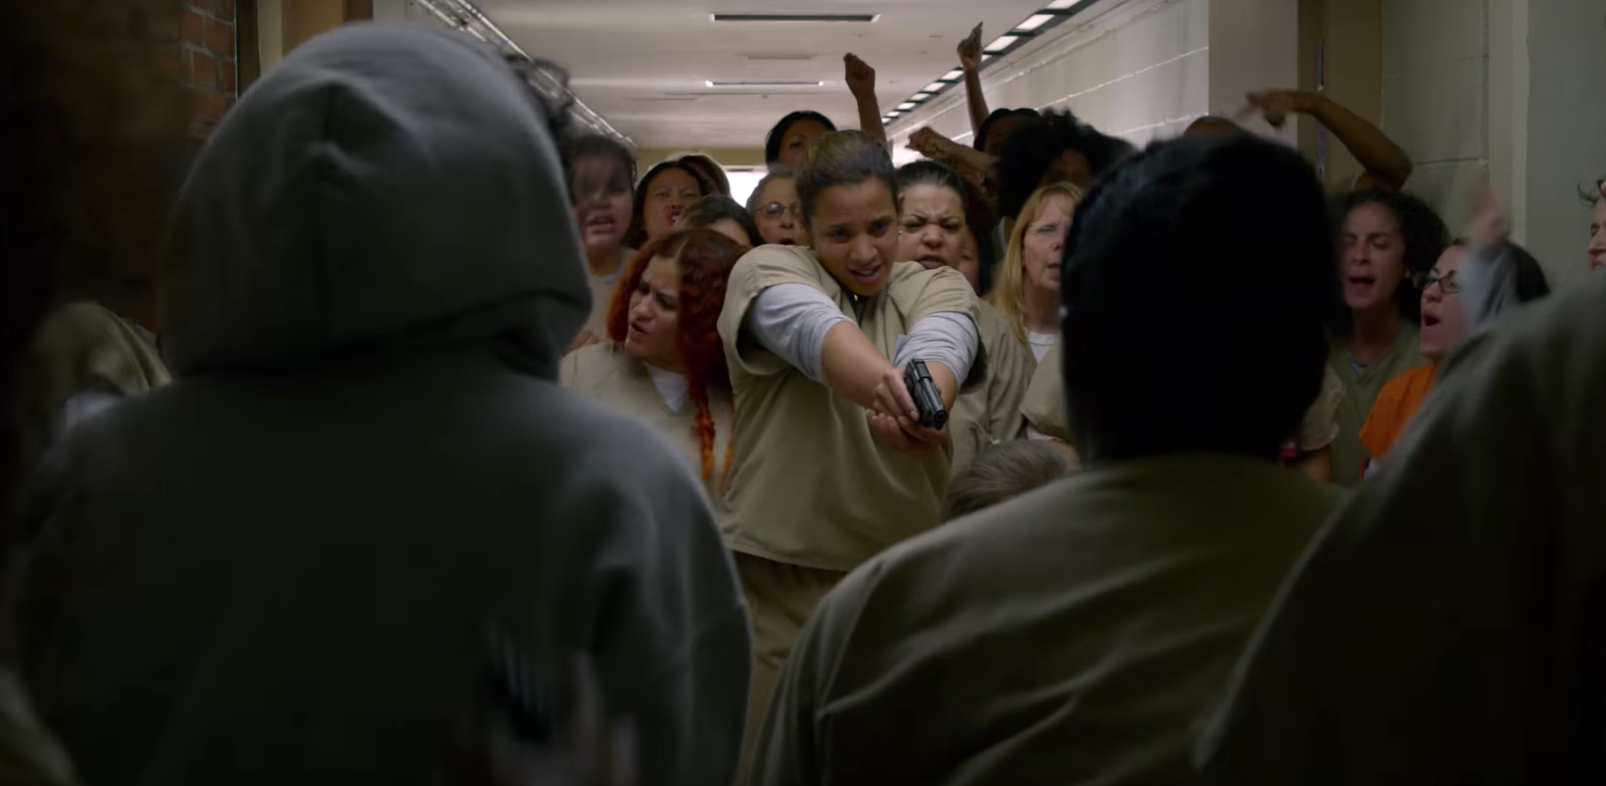 Mute 'Orange Is the New Black' Character Was an '80s Pop Star